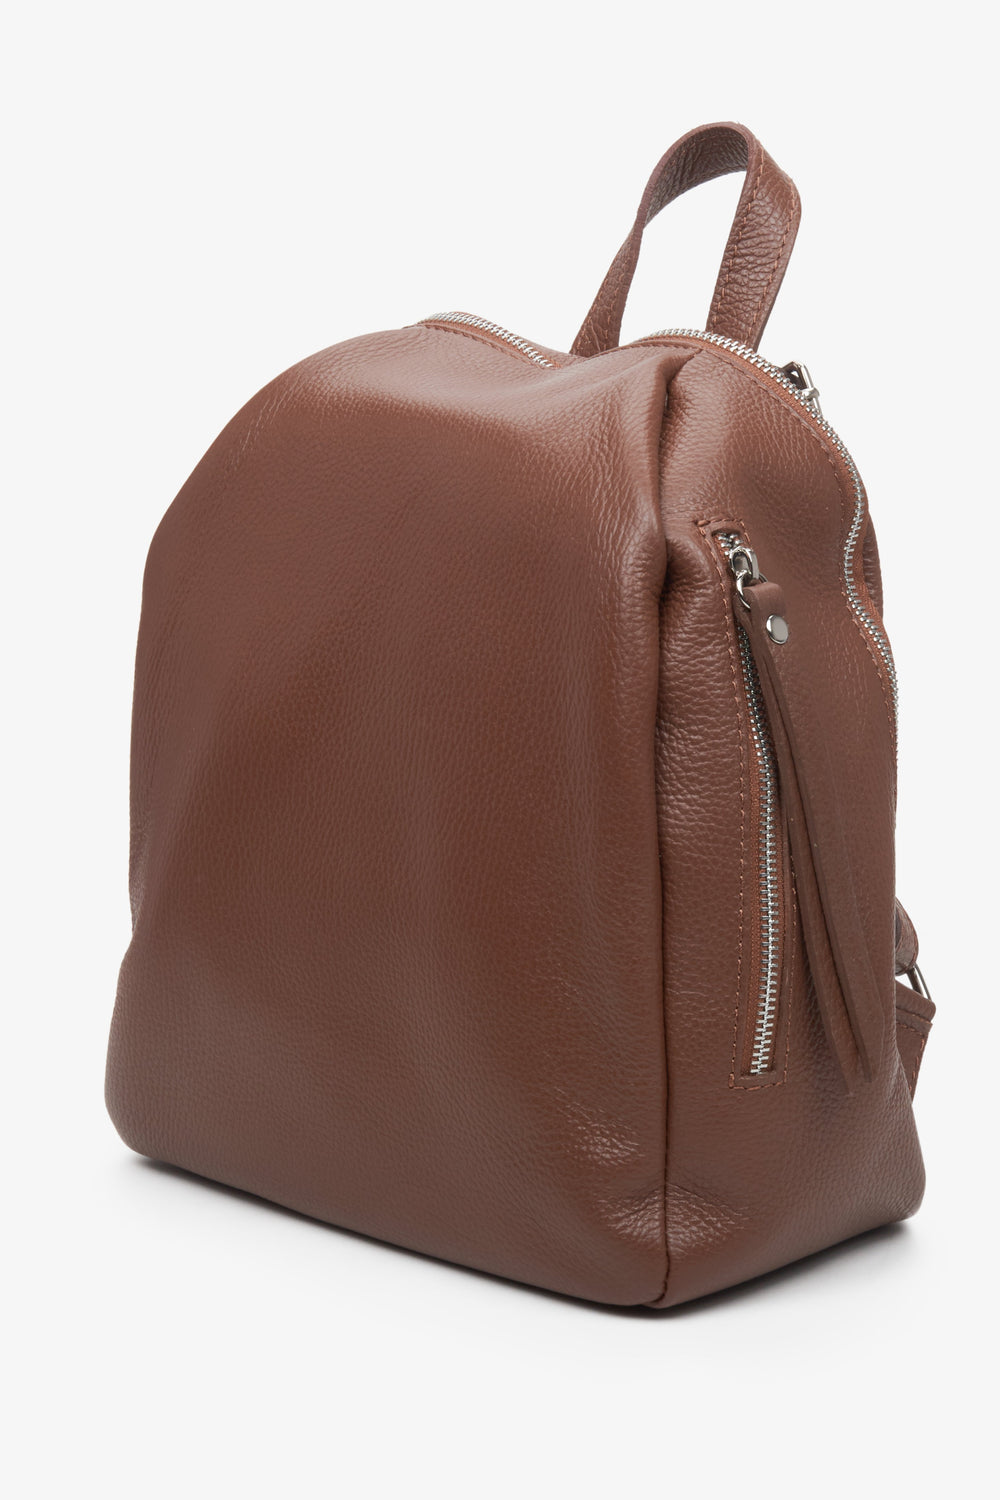 Women's brown leather backpack with silver accents for fall.